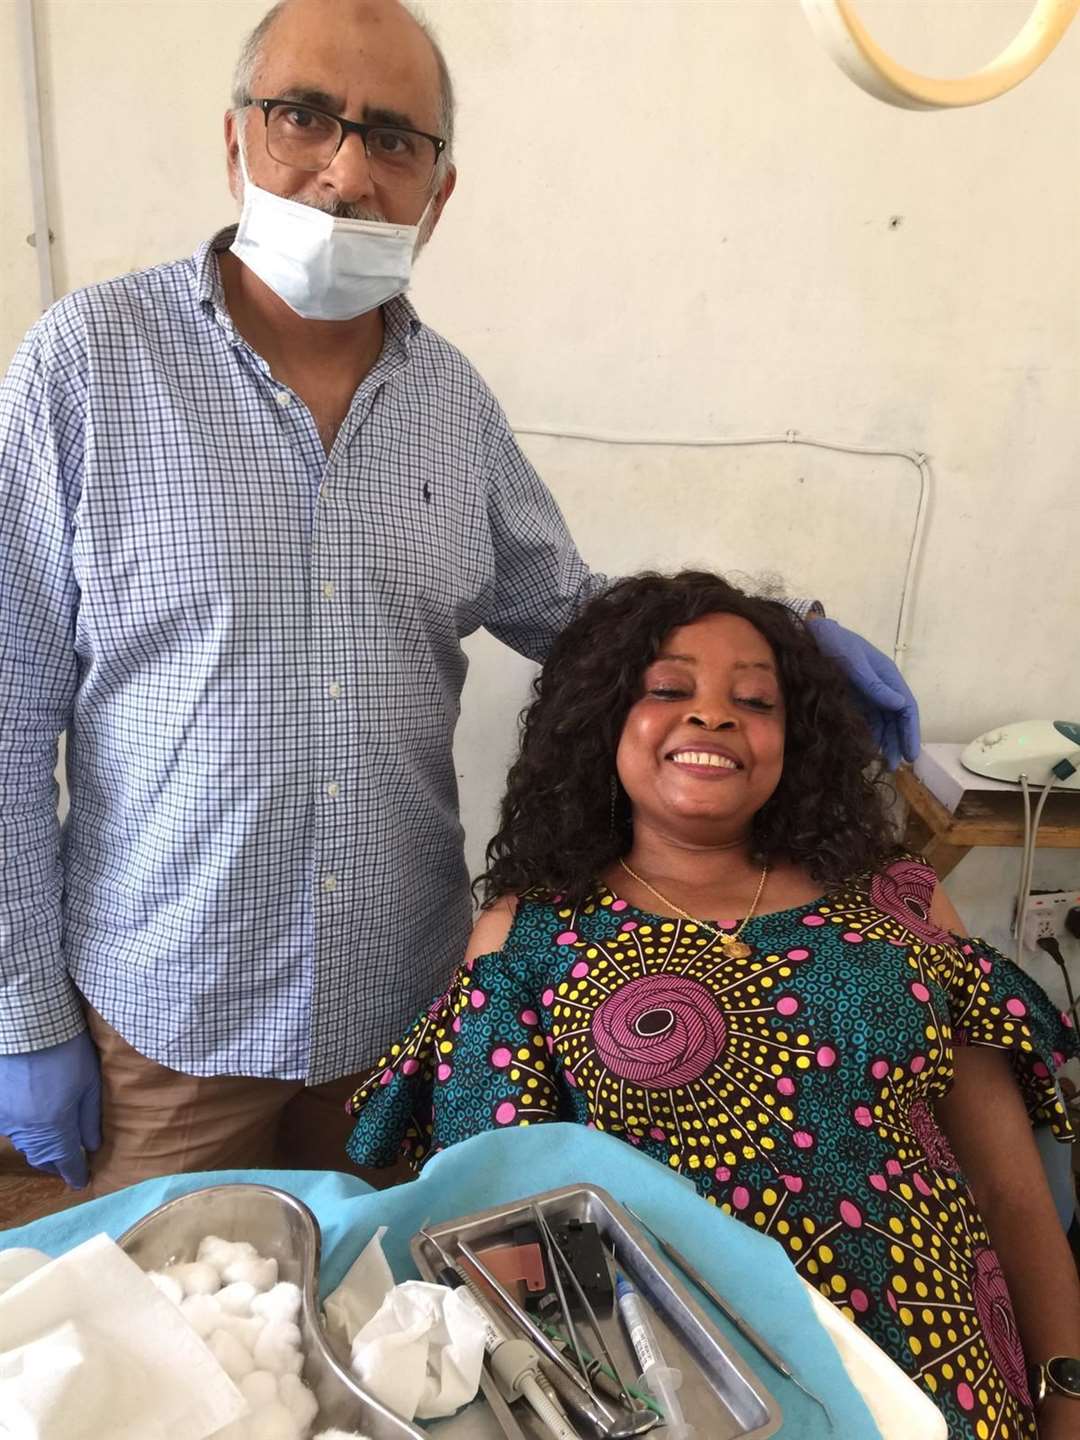 Dr Zahid Khan and a smiling patient